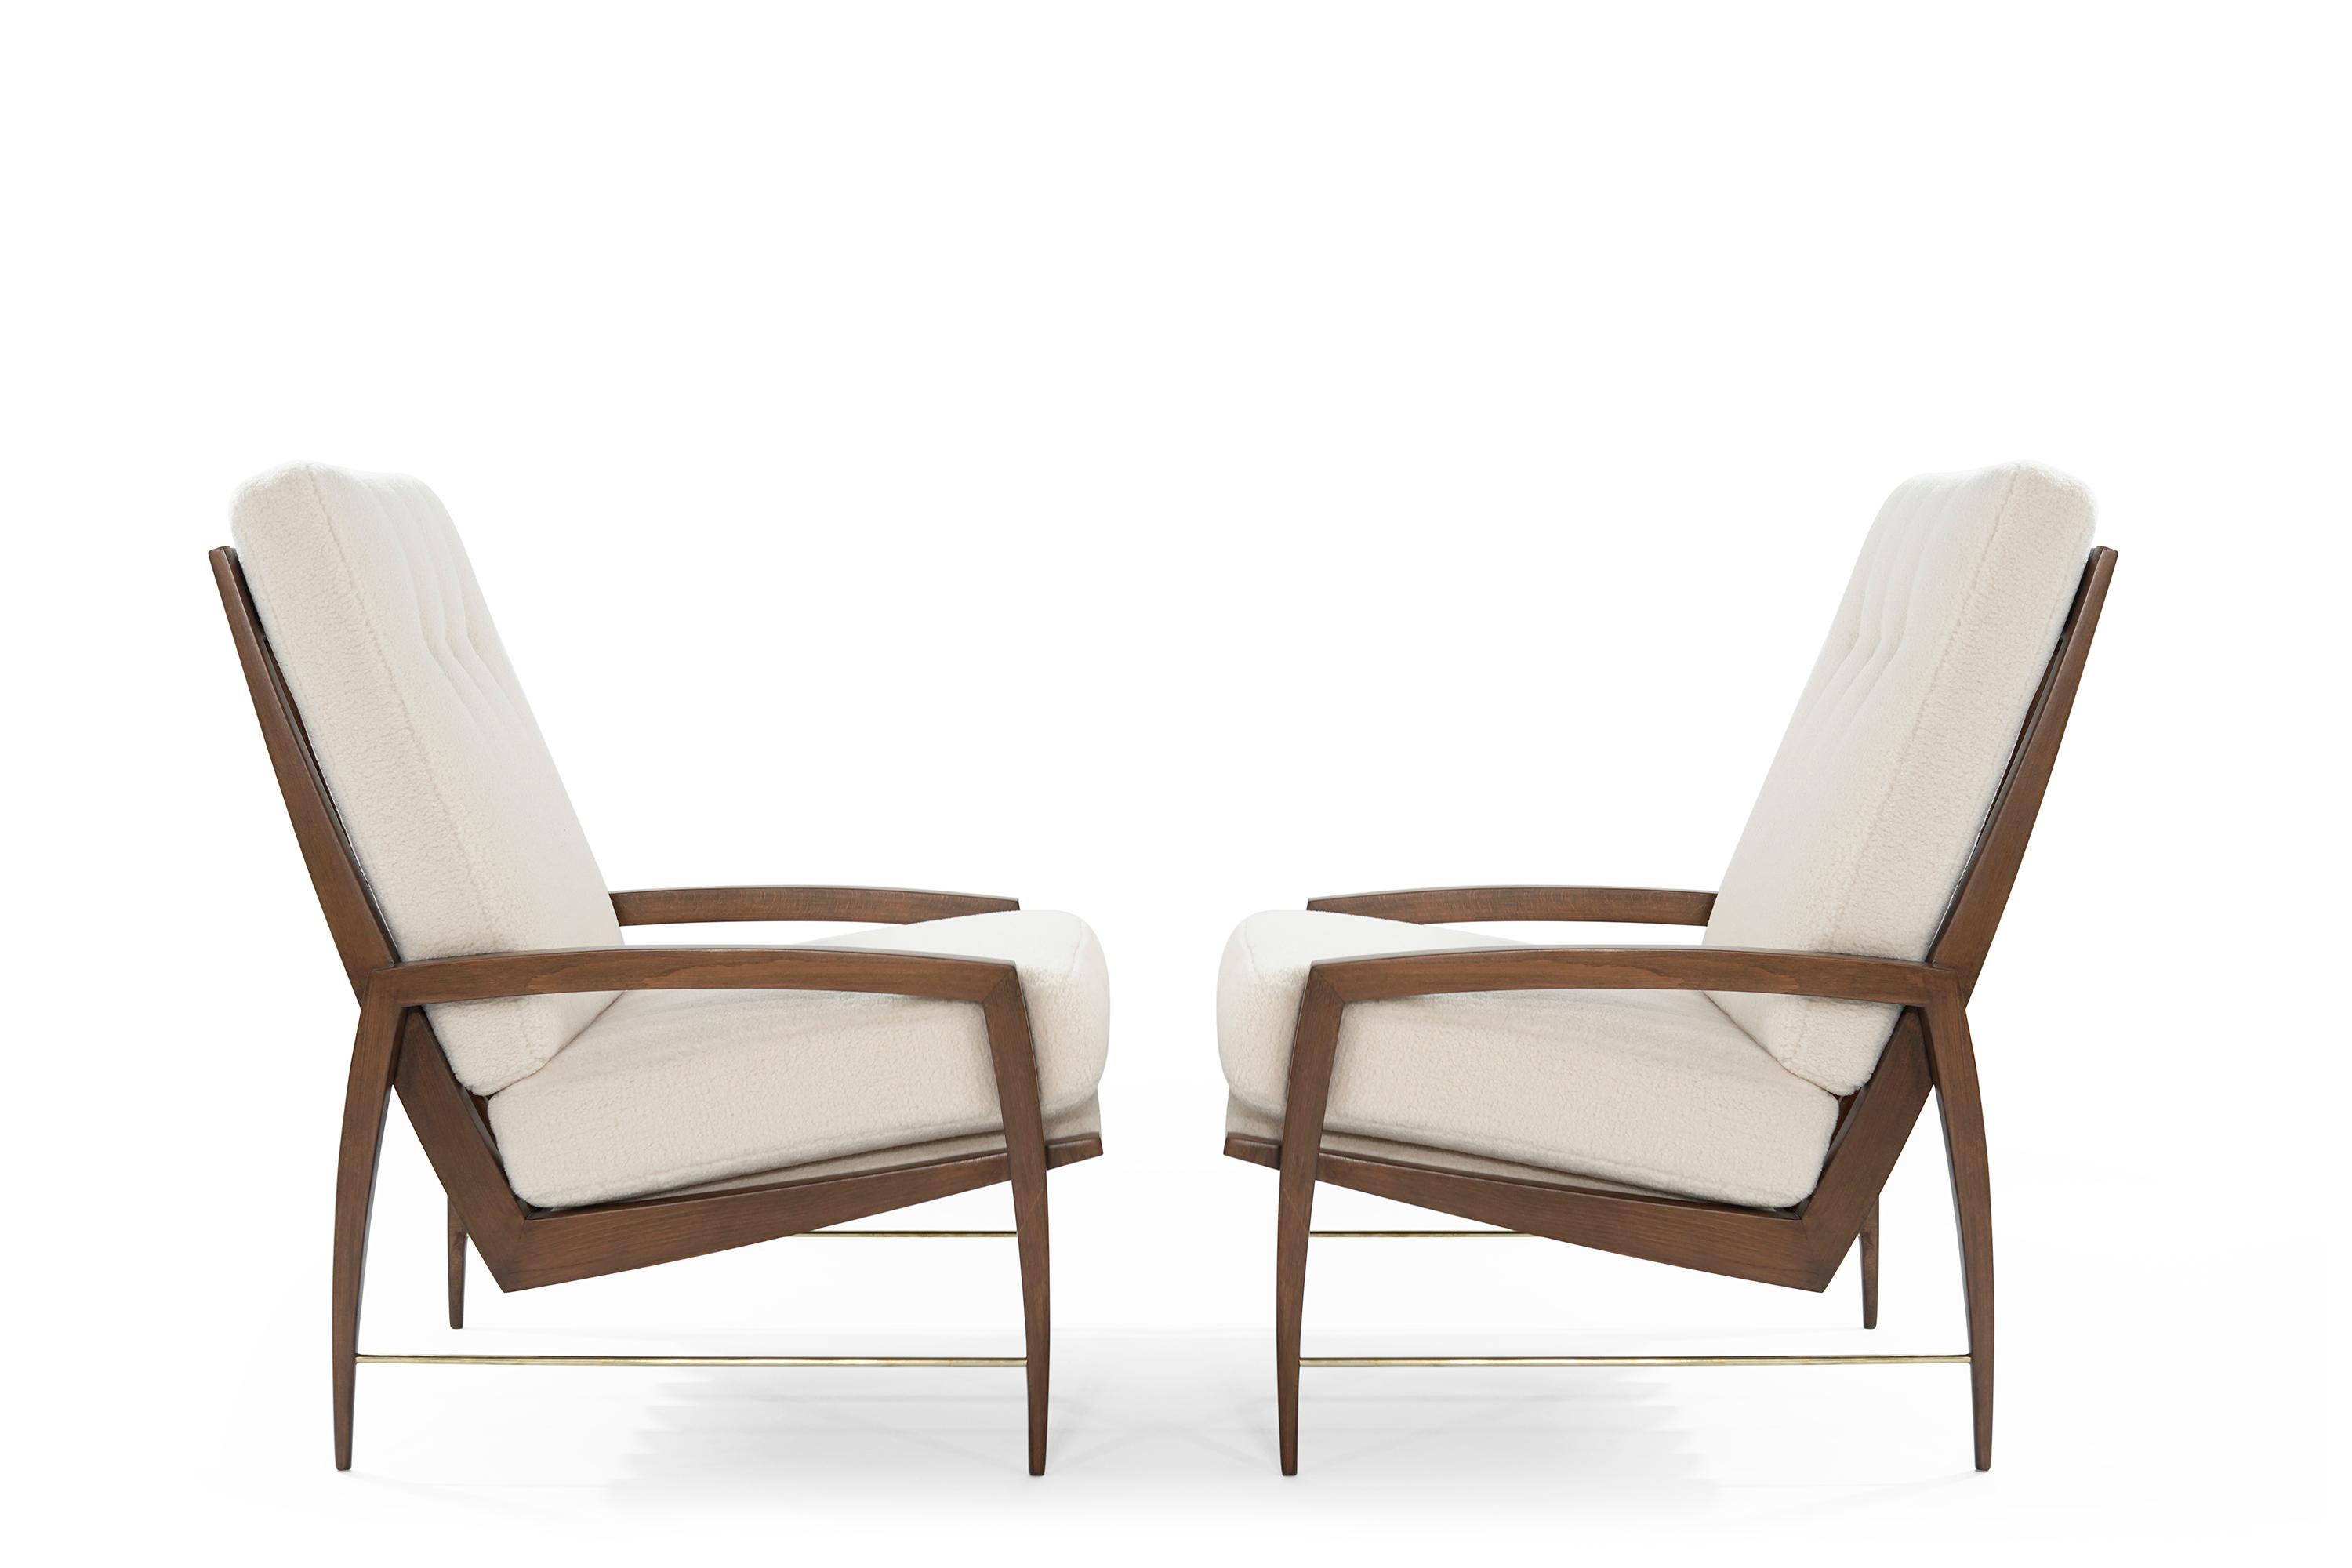 A pair of lounge chairs handcrafted from solid teak original from Denmark, circa 1950s. Teak framework fully restored back to its original finish. Newly upholstered in plush synthetic wool by Kravet. Featuring hand-polished solid brass rods.
  